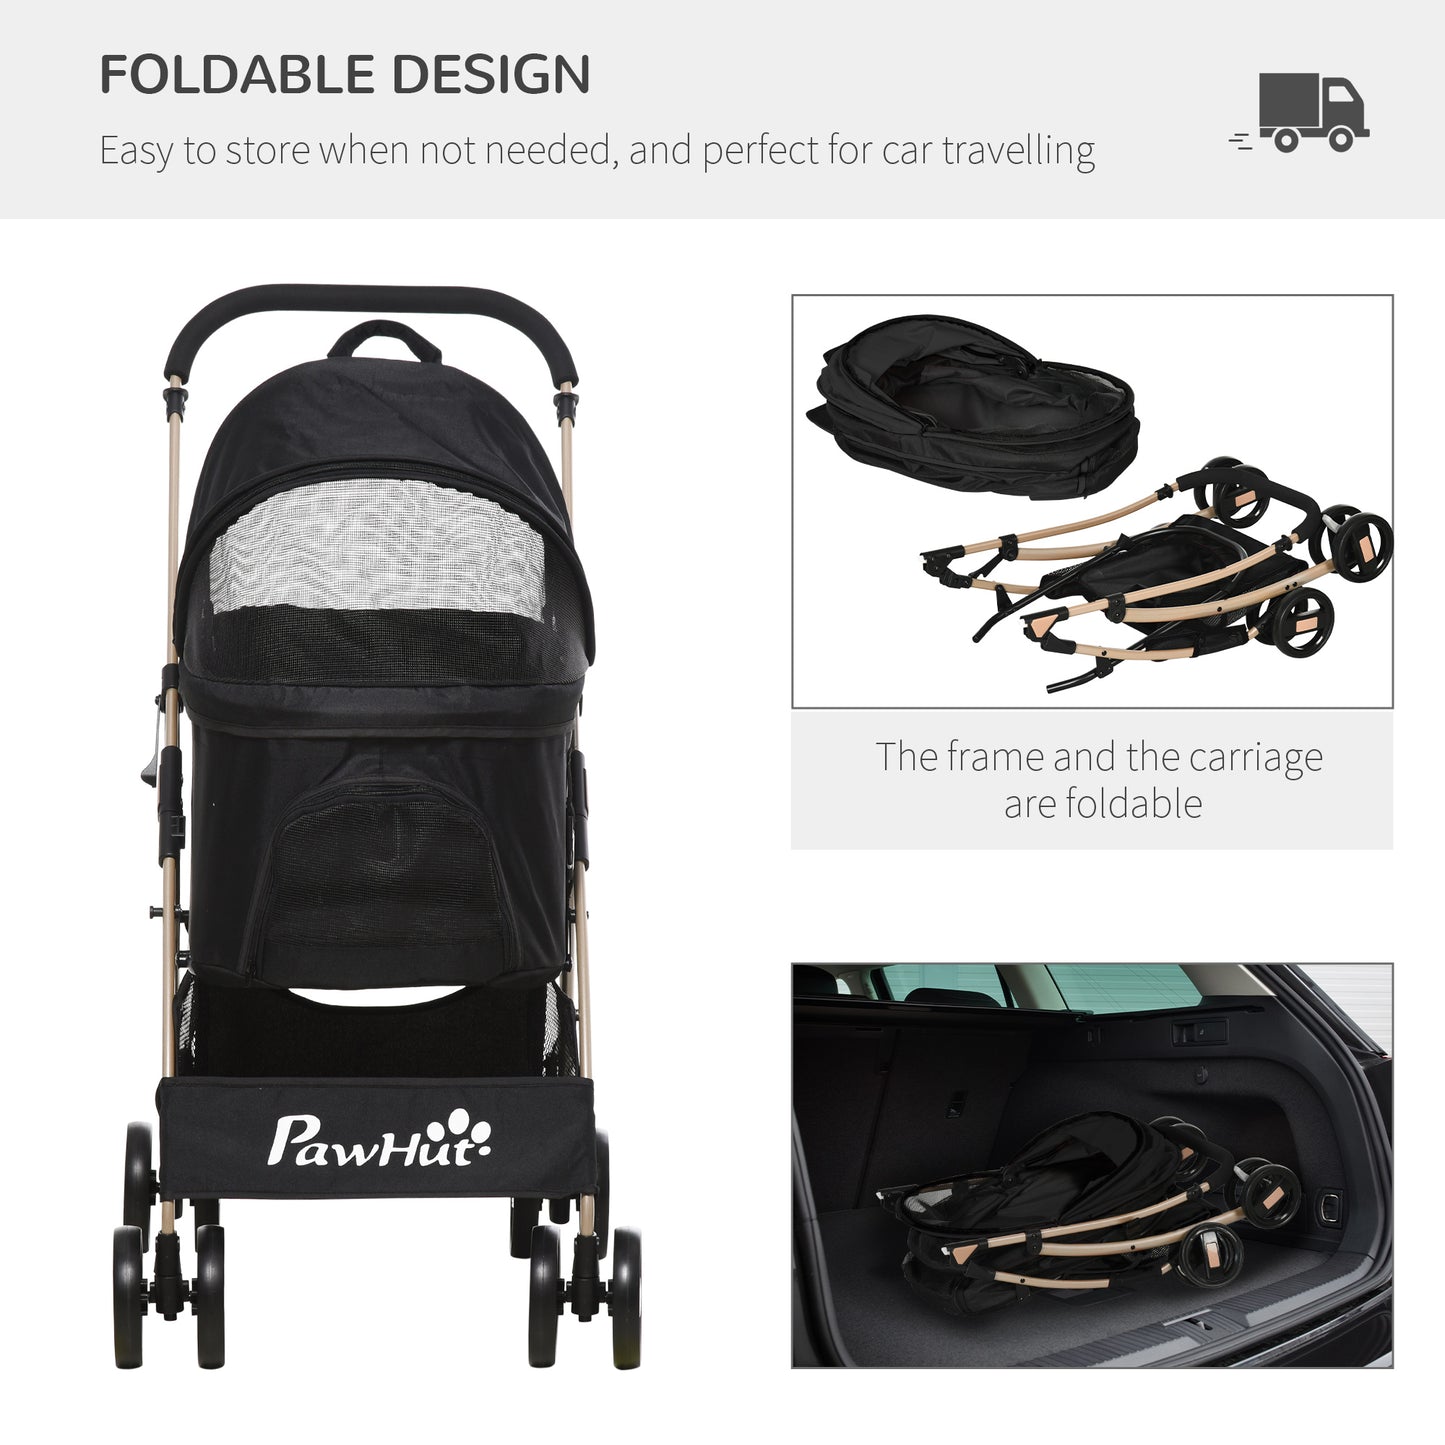 PawHut Detachable Pet Stroller, 3-In-1 Dog Cat Travel Carriage, Foldable Carrying Bag with Universal Wheel Brake Canopy Basket Storage Bag, Black